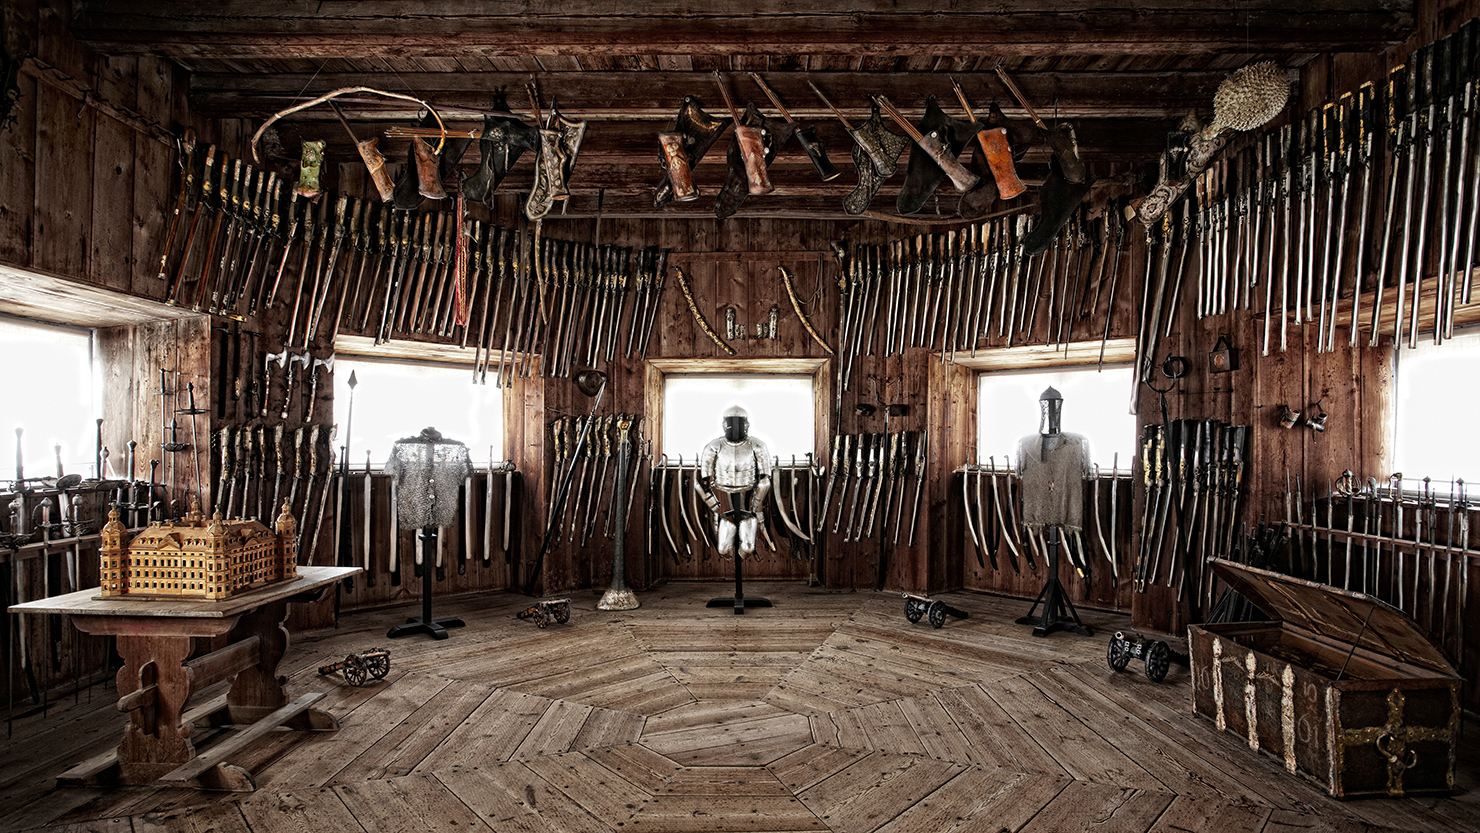 A wood-panelled room filled with guns, swords and suits of armour.